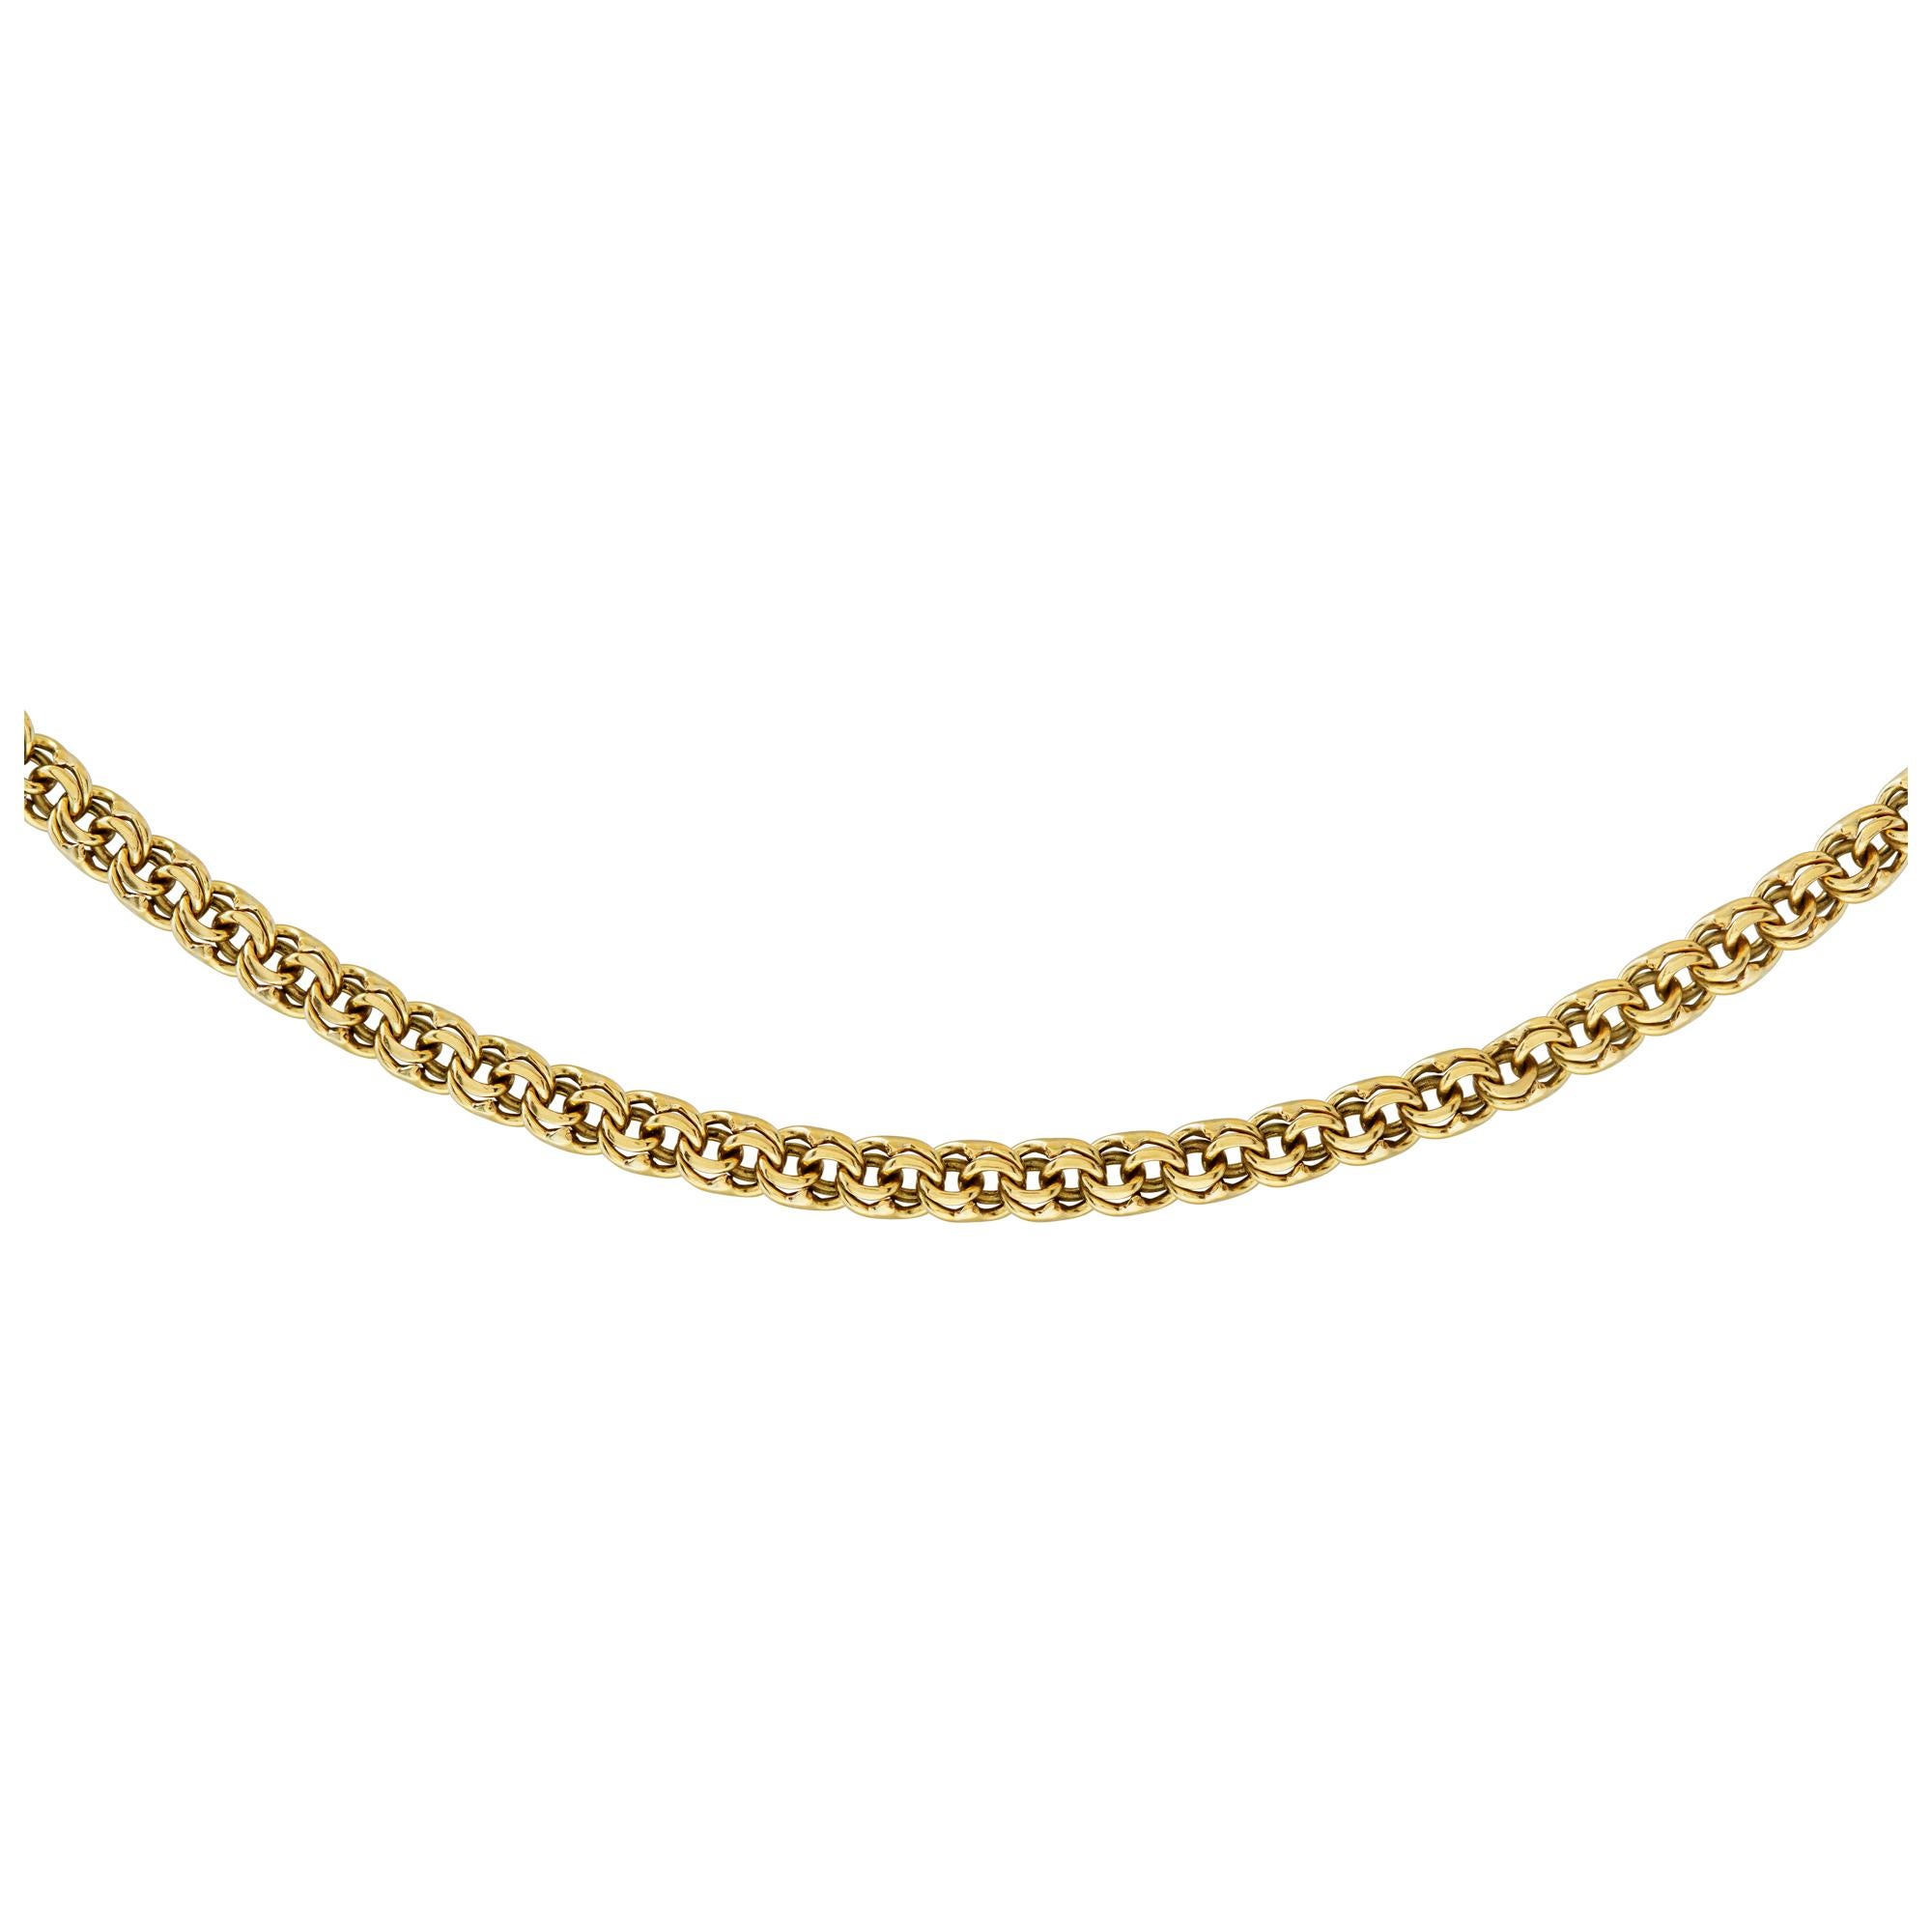 18k yellow gold chain. Length 24 inches. Width 2.5mm
